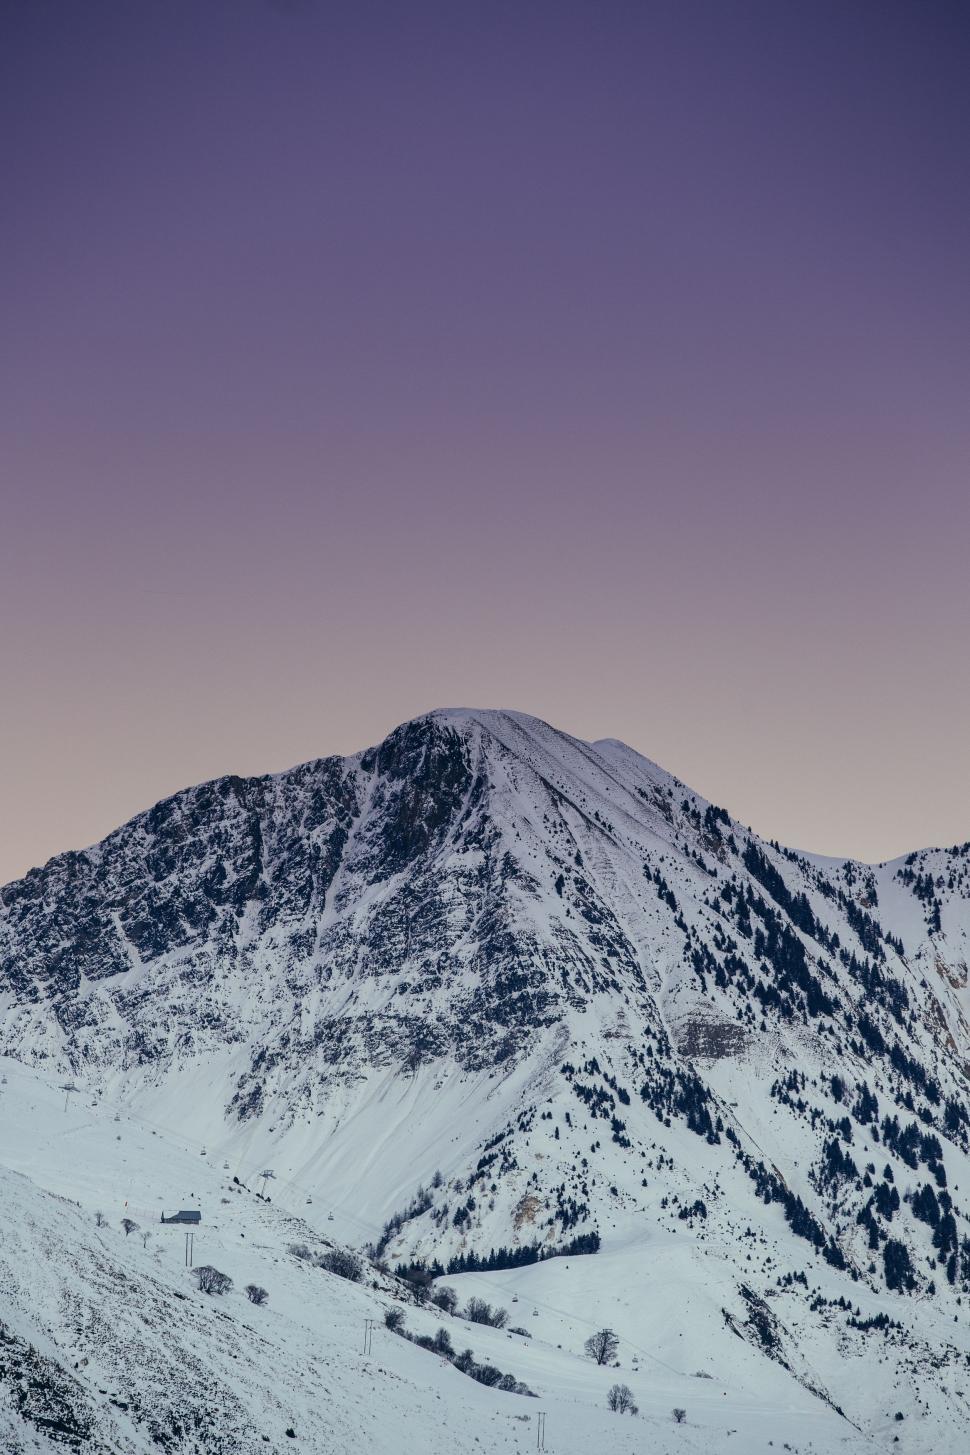 Free Image of Snow-covered Mountain Under Purple Sky 